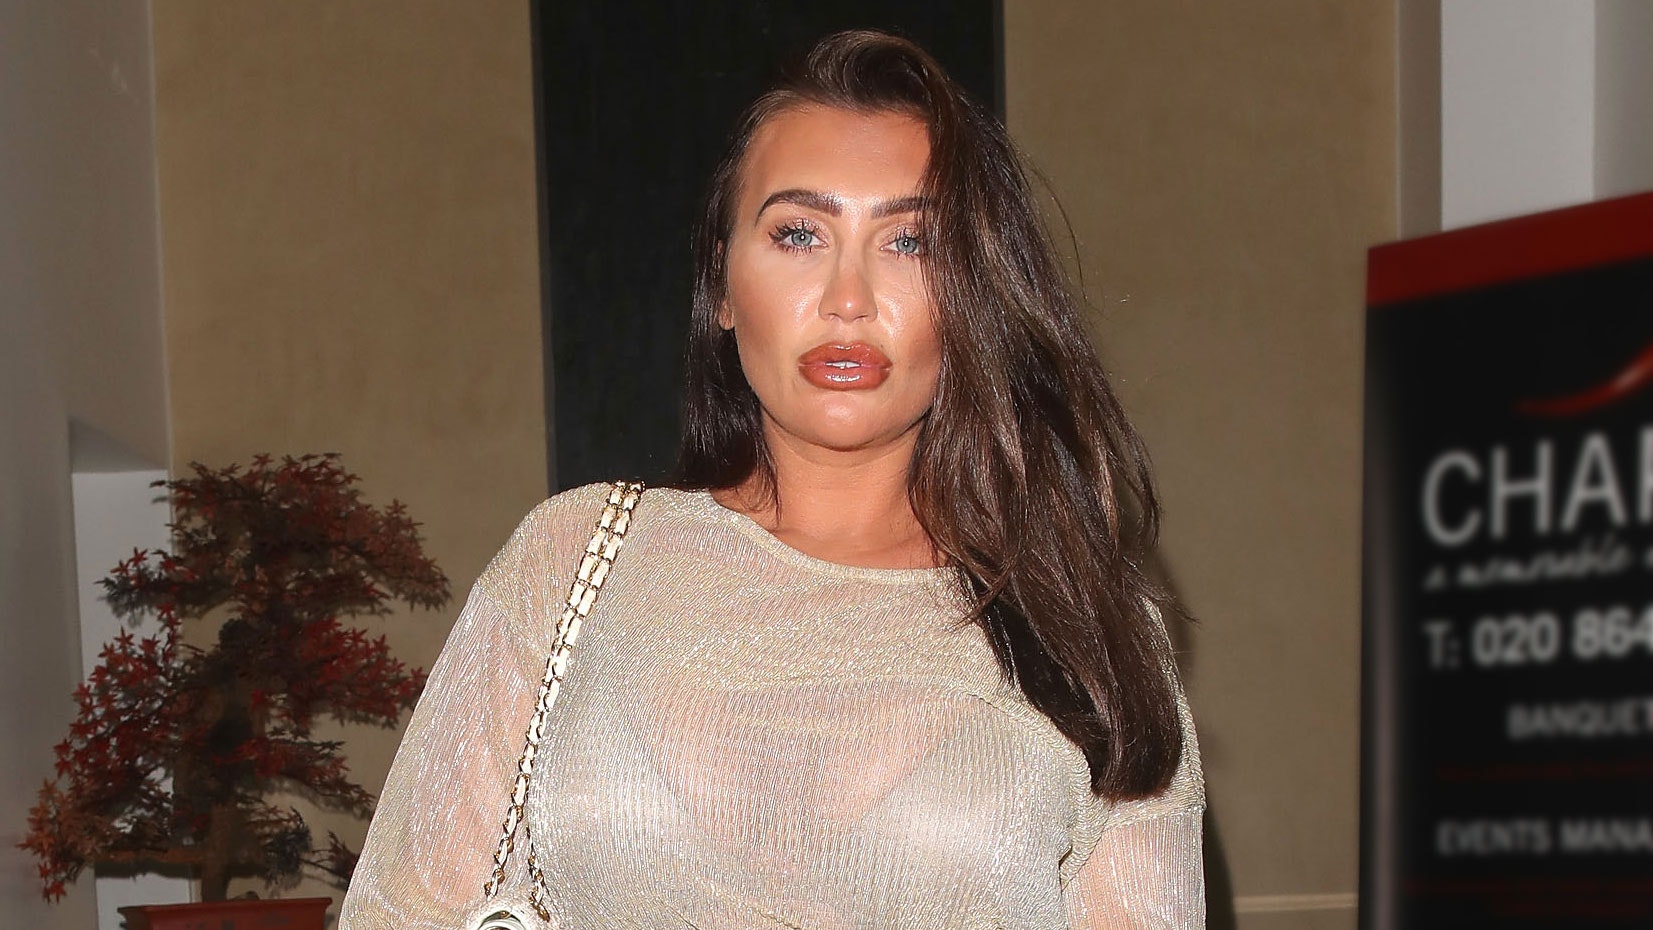 Lauren Goodger denies she's had bum fillers and reveals her bum is bigger  as she's put on weight